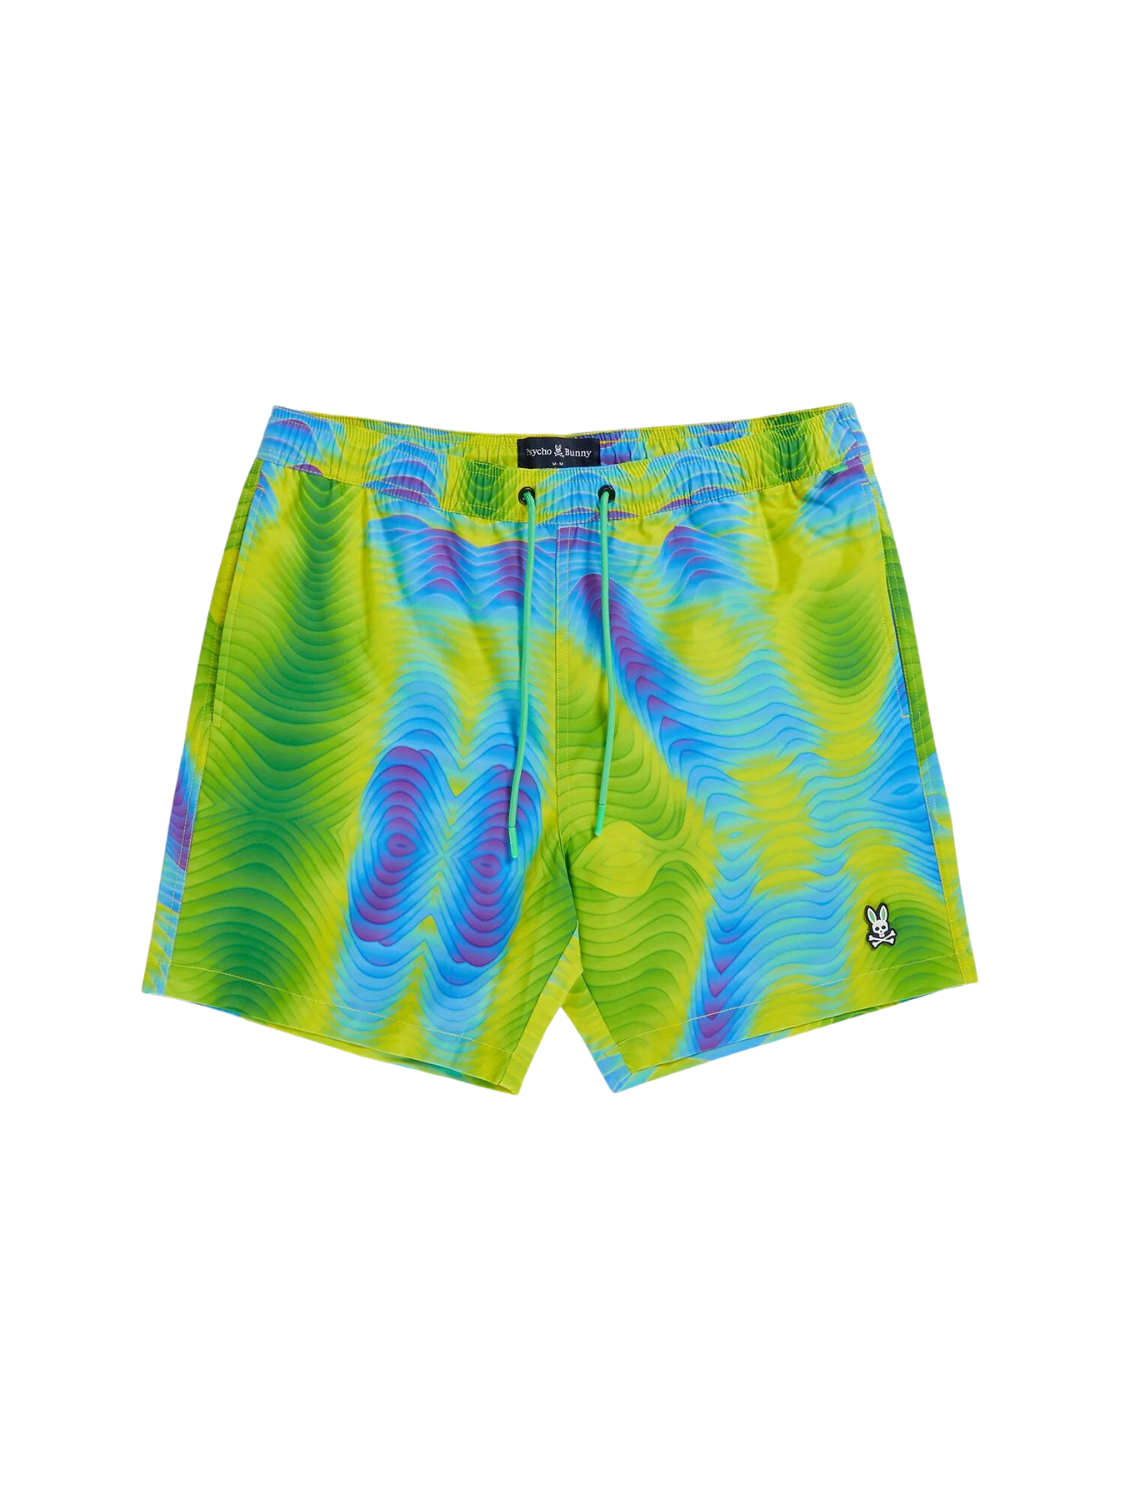 men's Montgomery swim trunk turns swimwear on its head with a dizzying all-over pattern